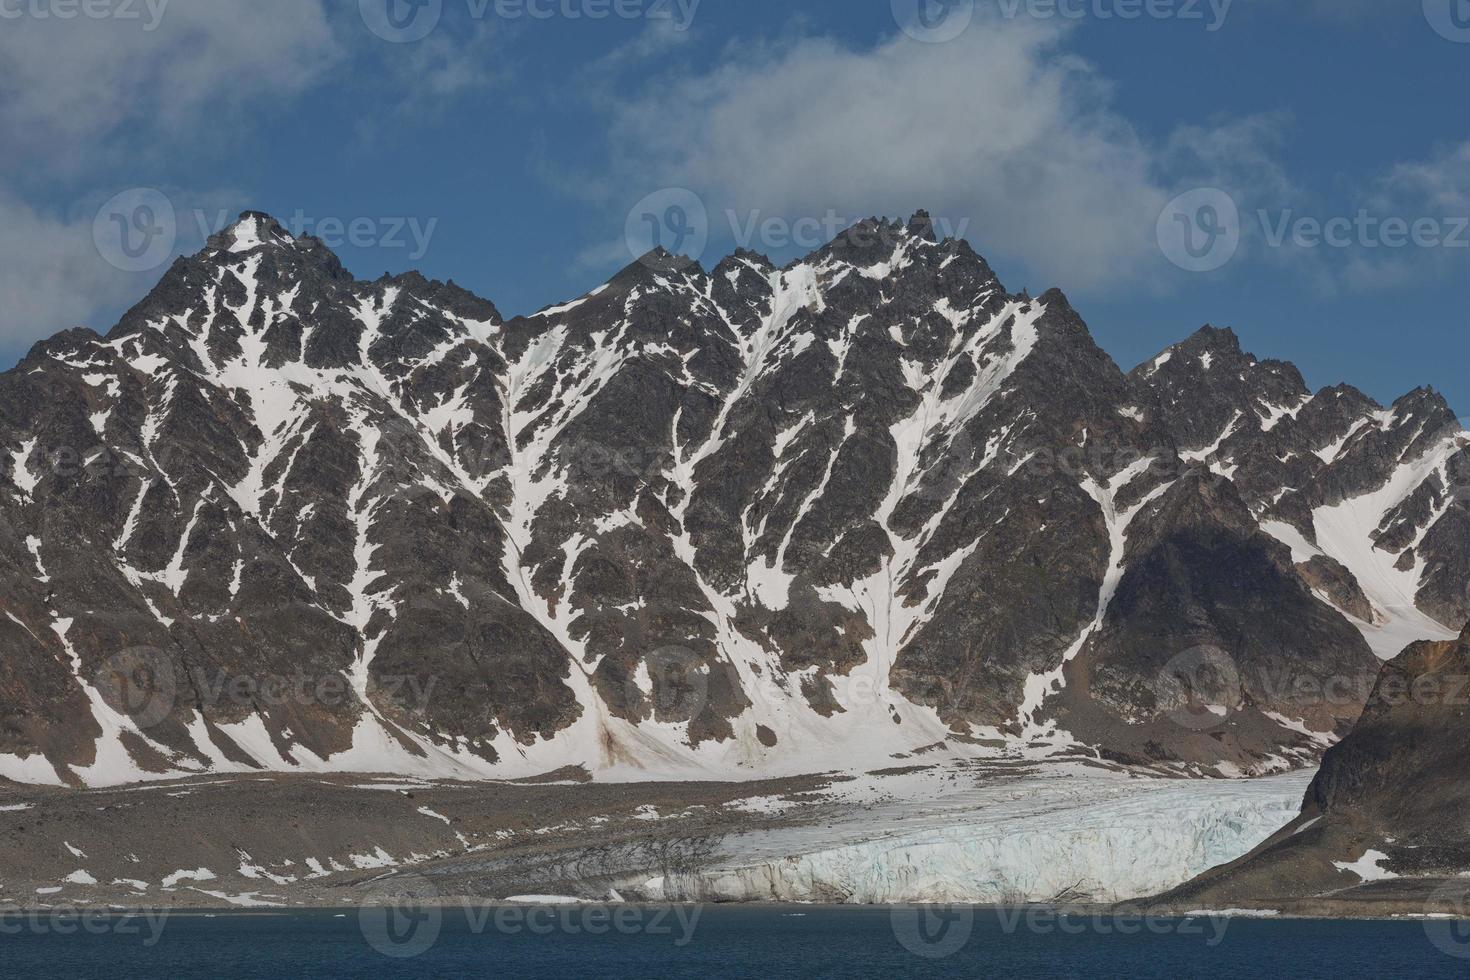 The coastline and mountains of Liefdefjord, Svalbard Islands, Spitzbergen photo